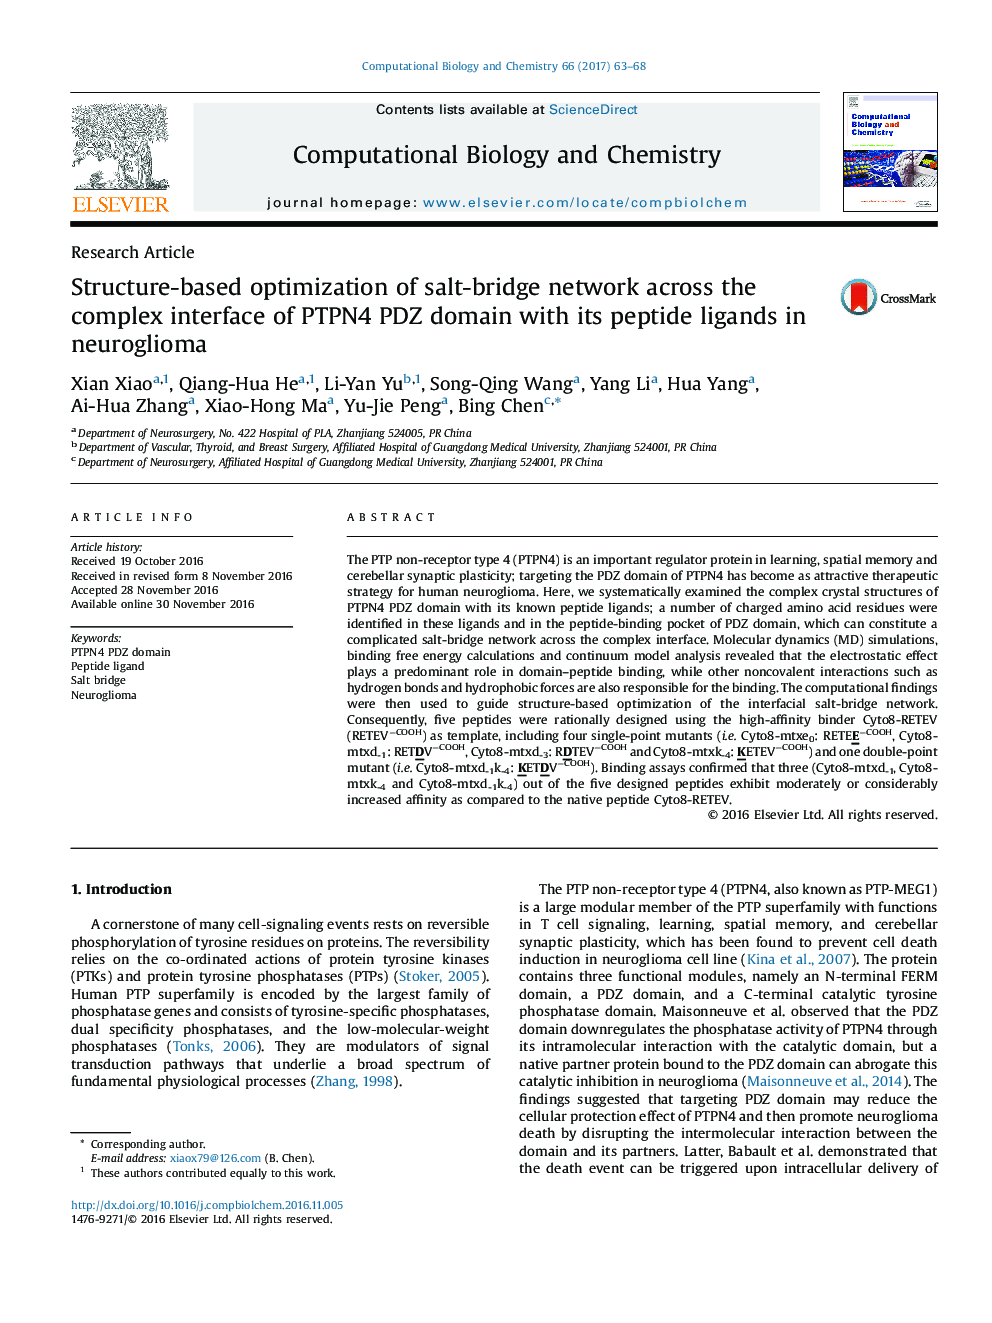 Research ArticleStructure-based optimization of salt-bridge network across the complex interface of PTPN4 PDZ domain with its peptide ligands in neuroglioma